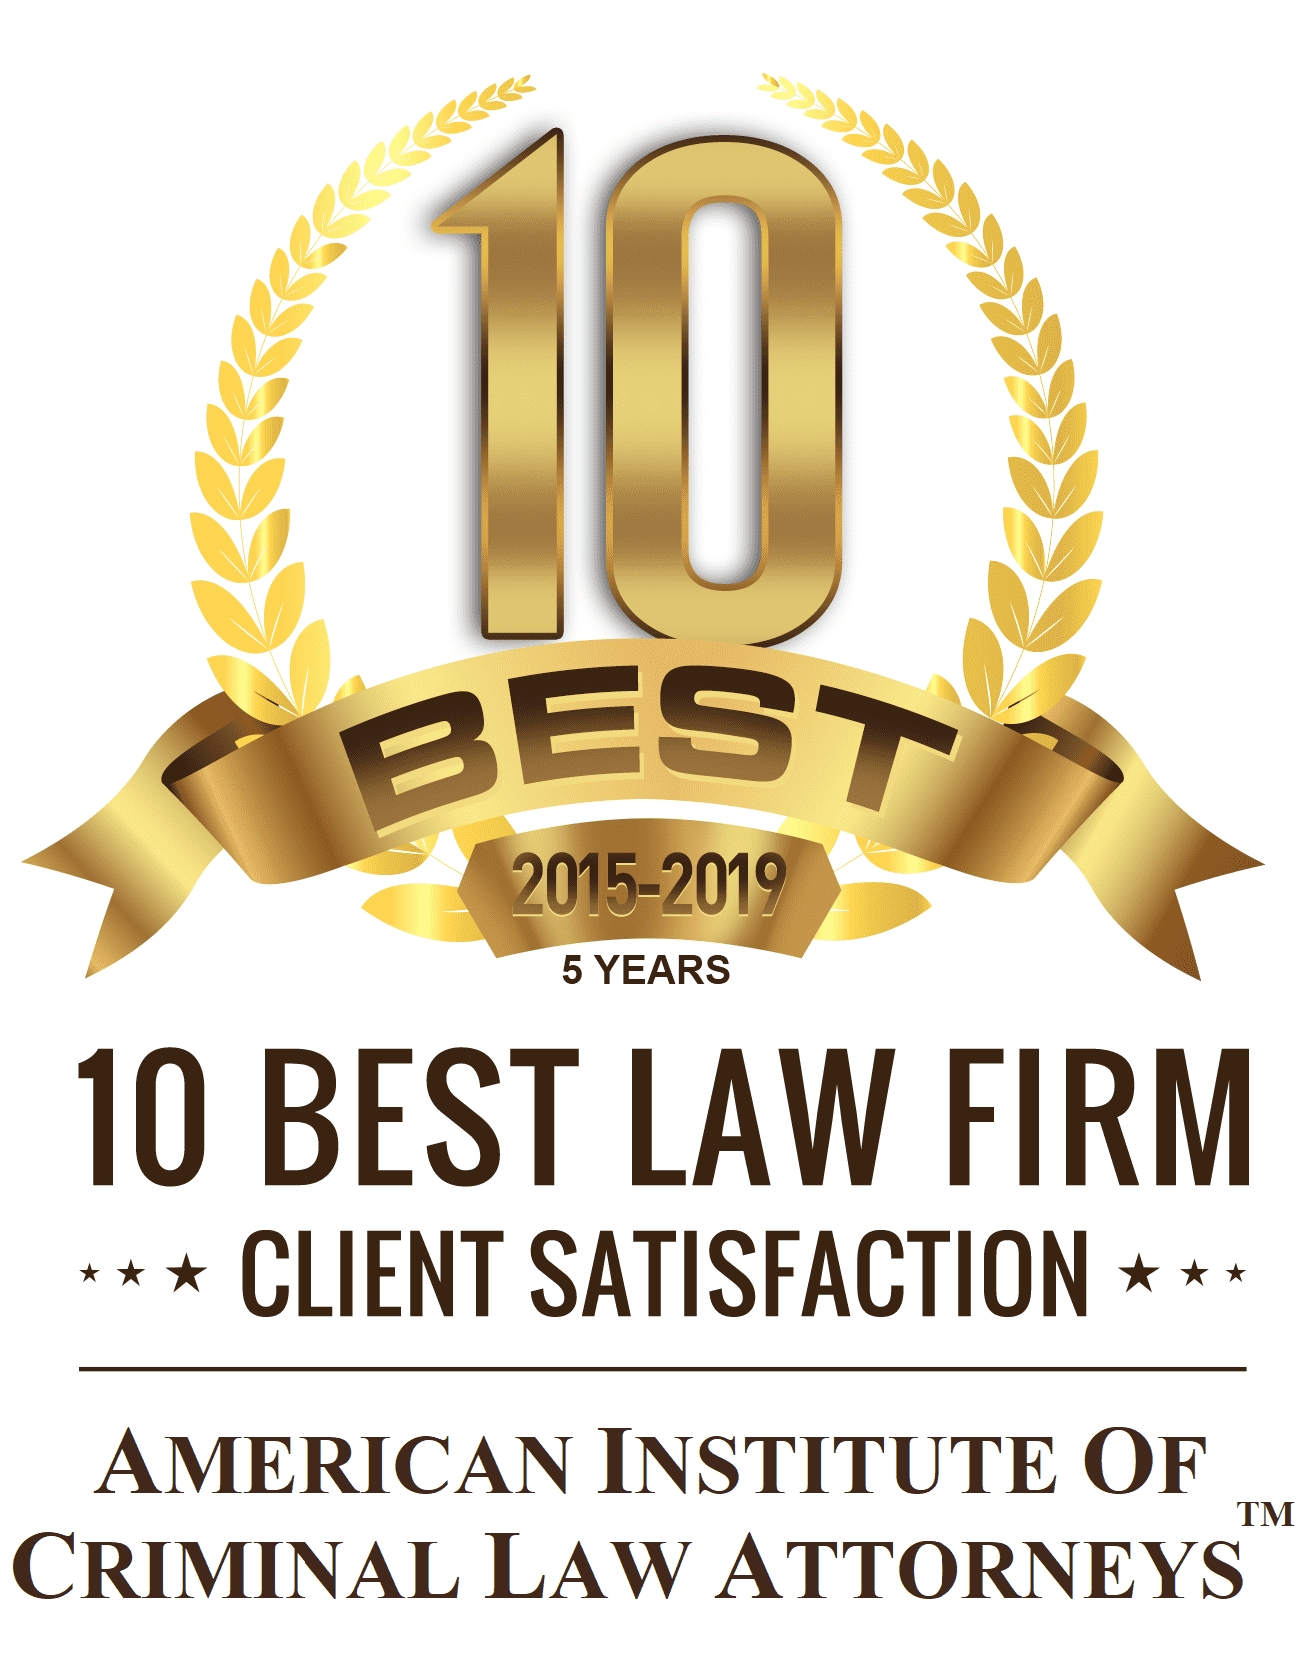 10 Best Law Firm for Client Satisfaction by the American Institute of Criminal Law Attorneys